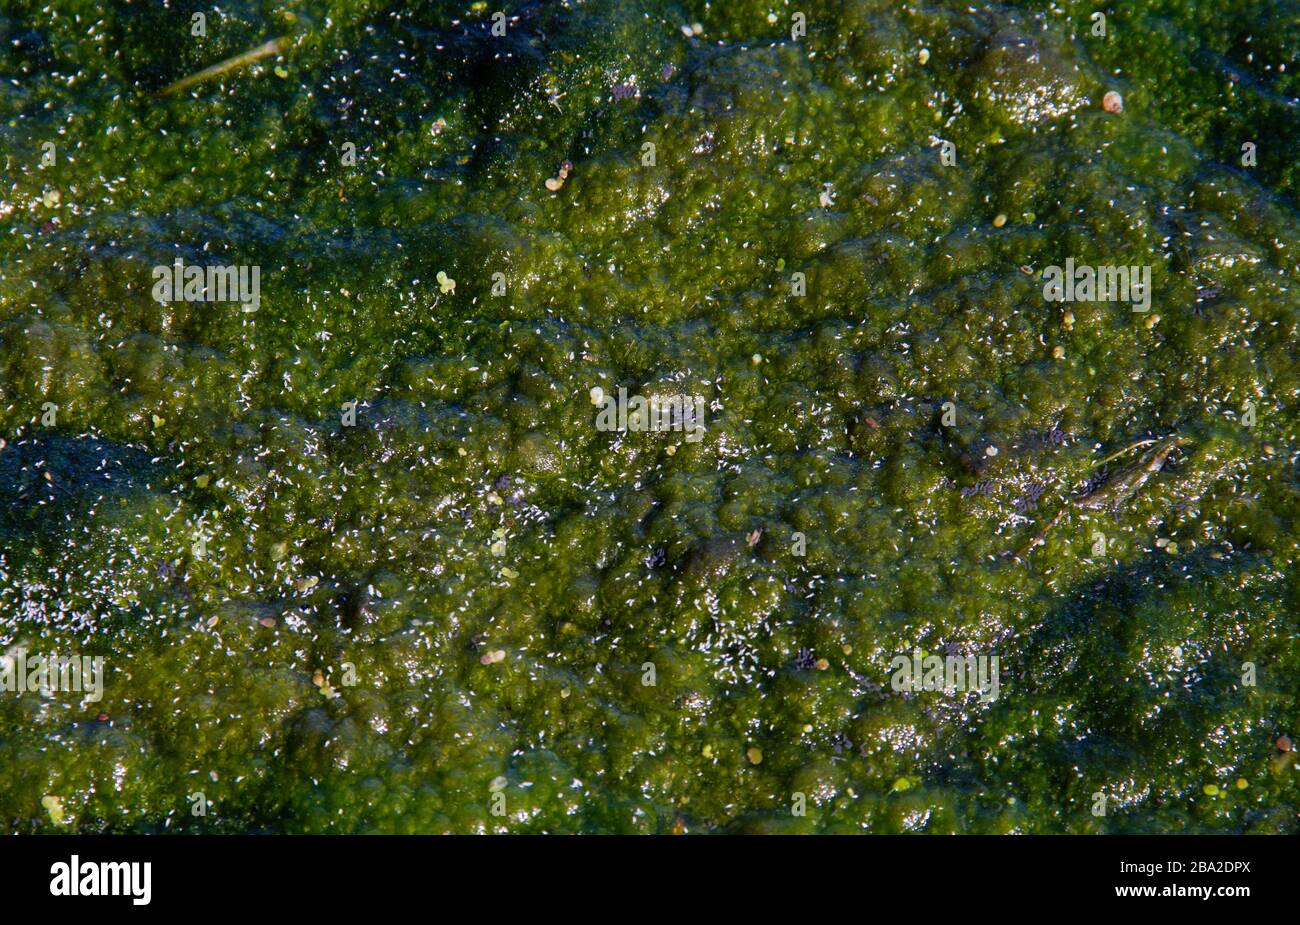 Thick layer of algae on polluted water Stock Photo